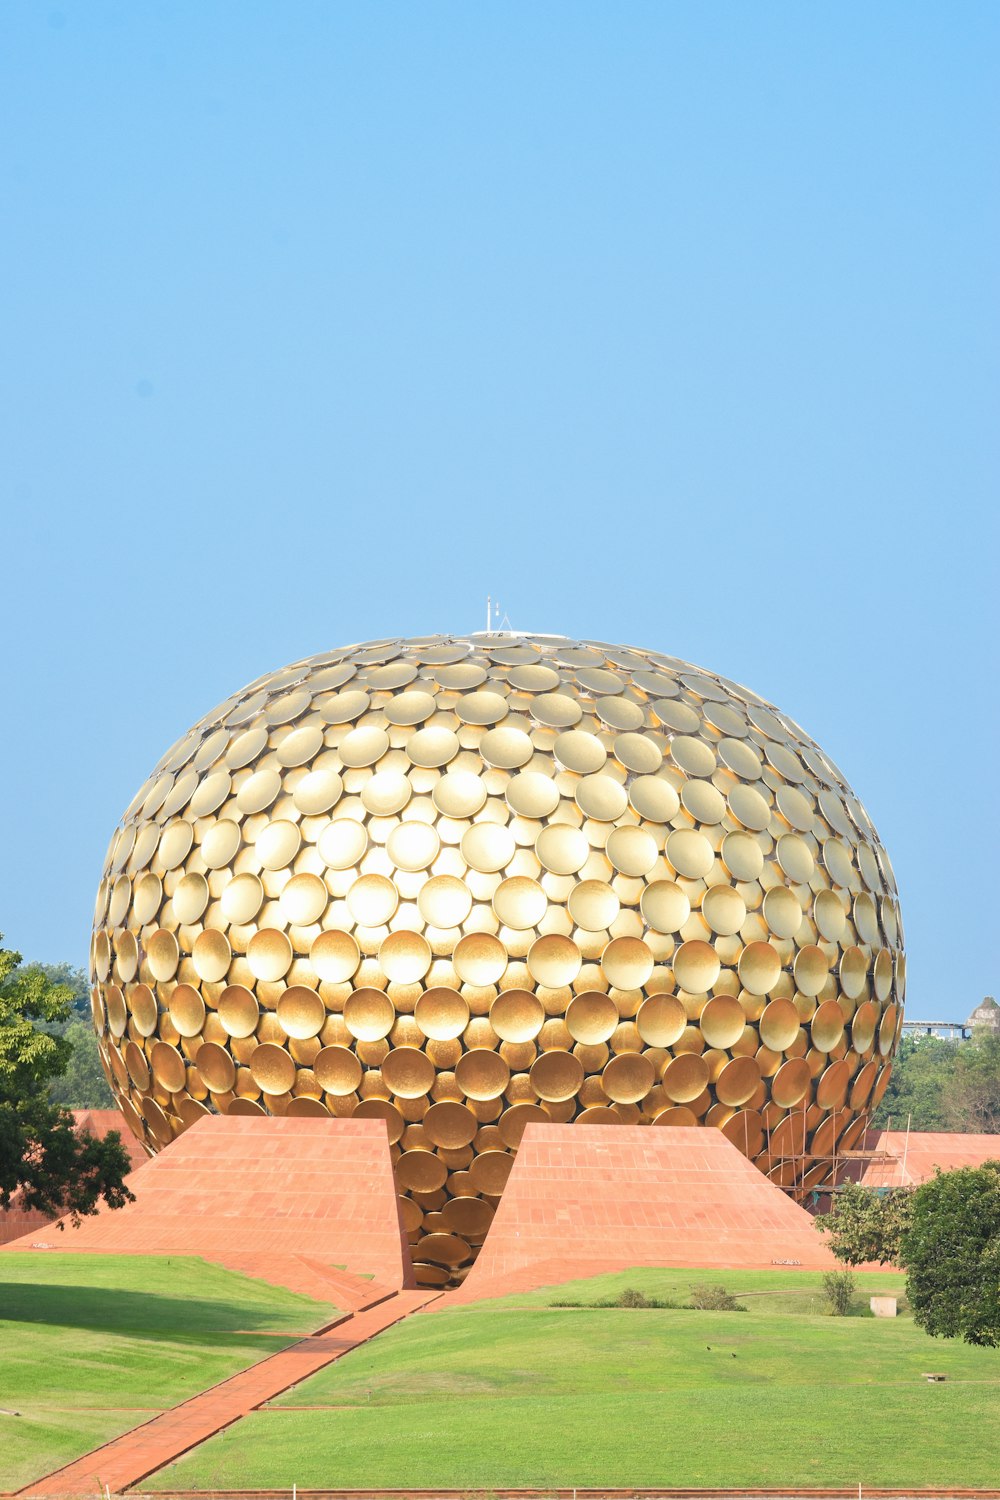 a large golden ball sitting on top of a lush green field